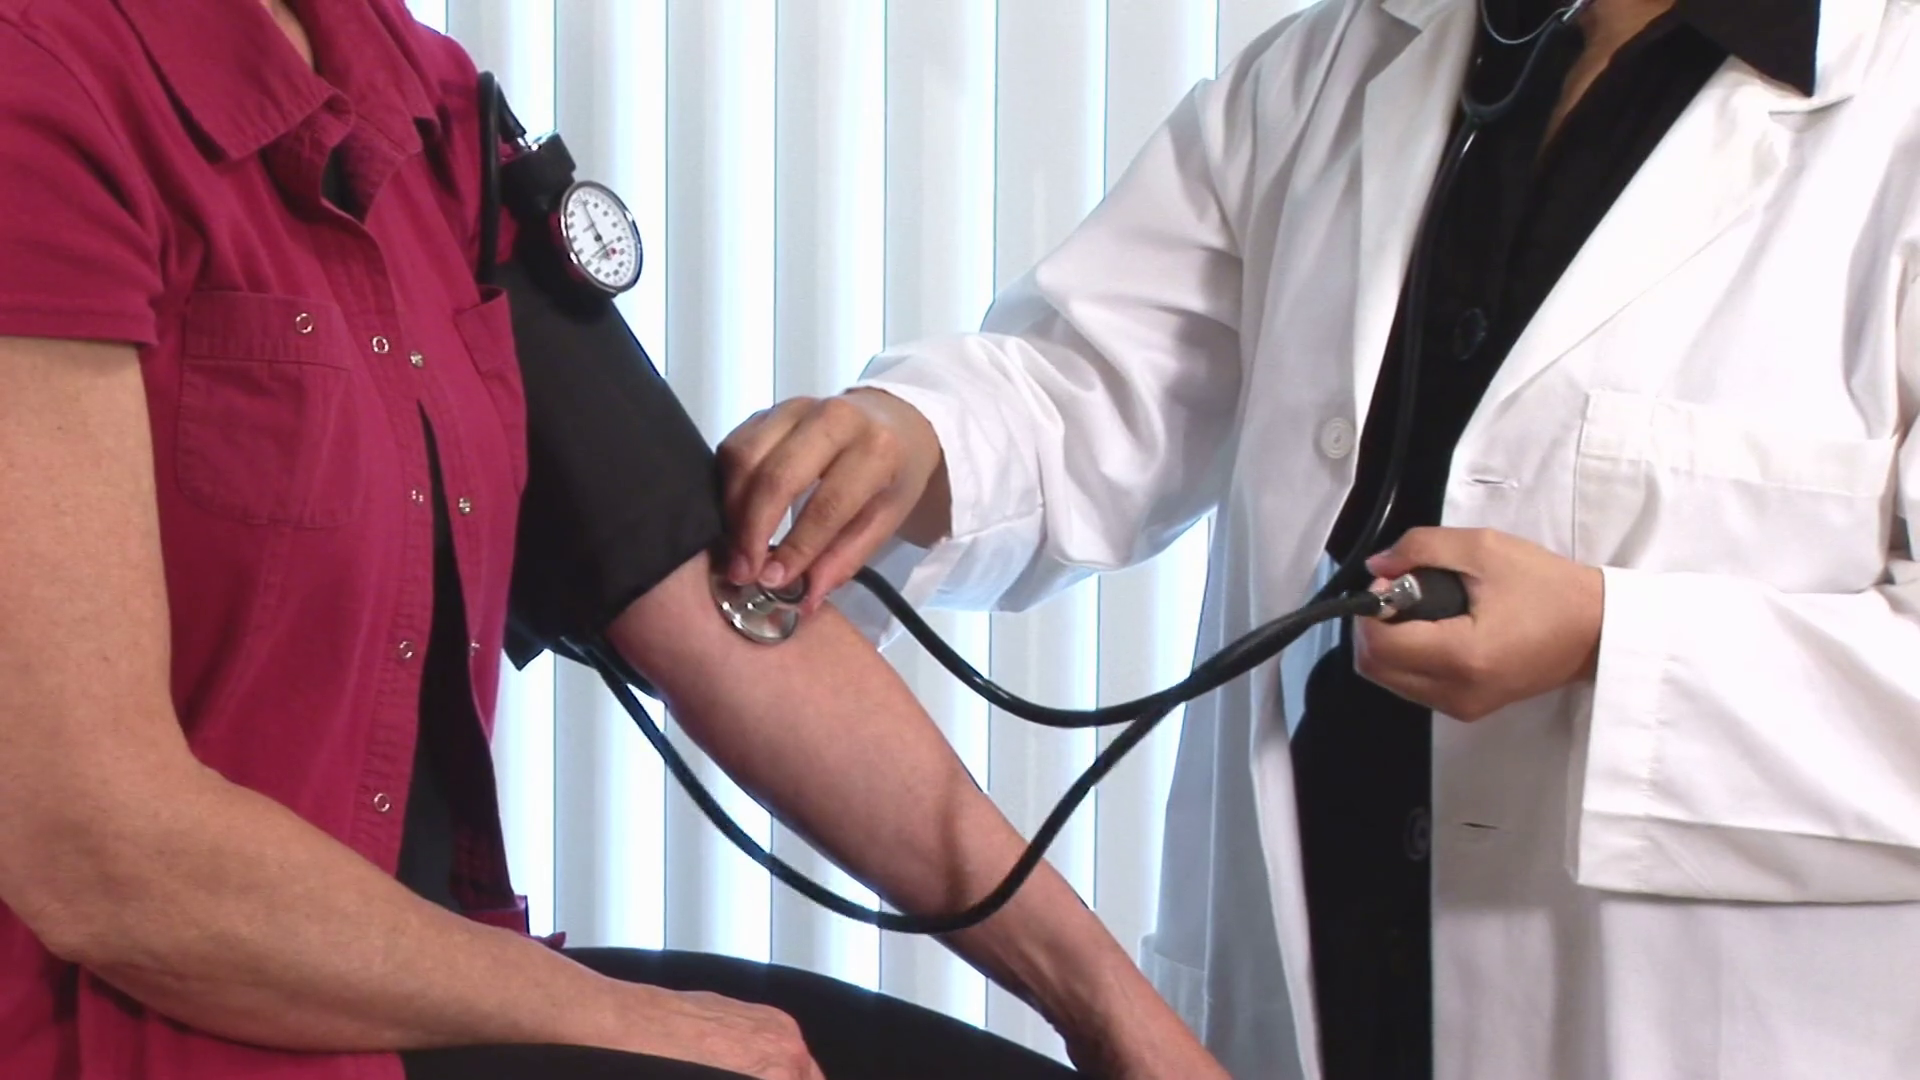 blood pressure reading Stock Video Footage